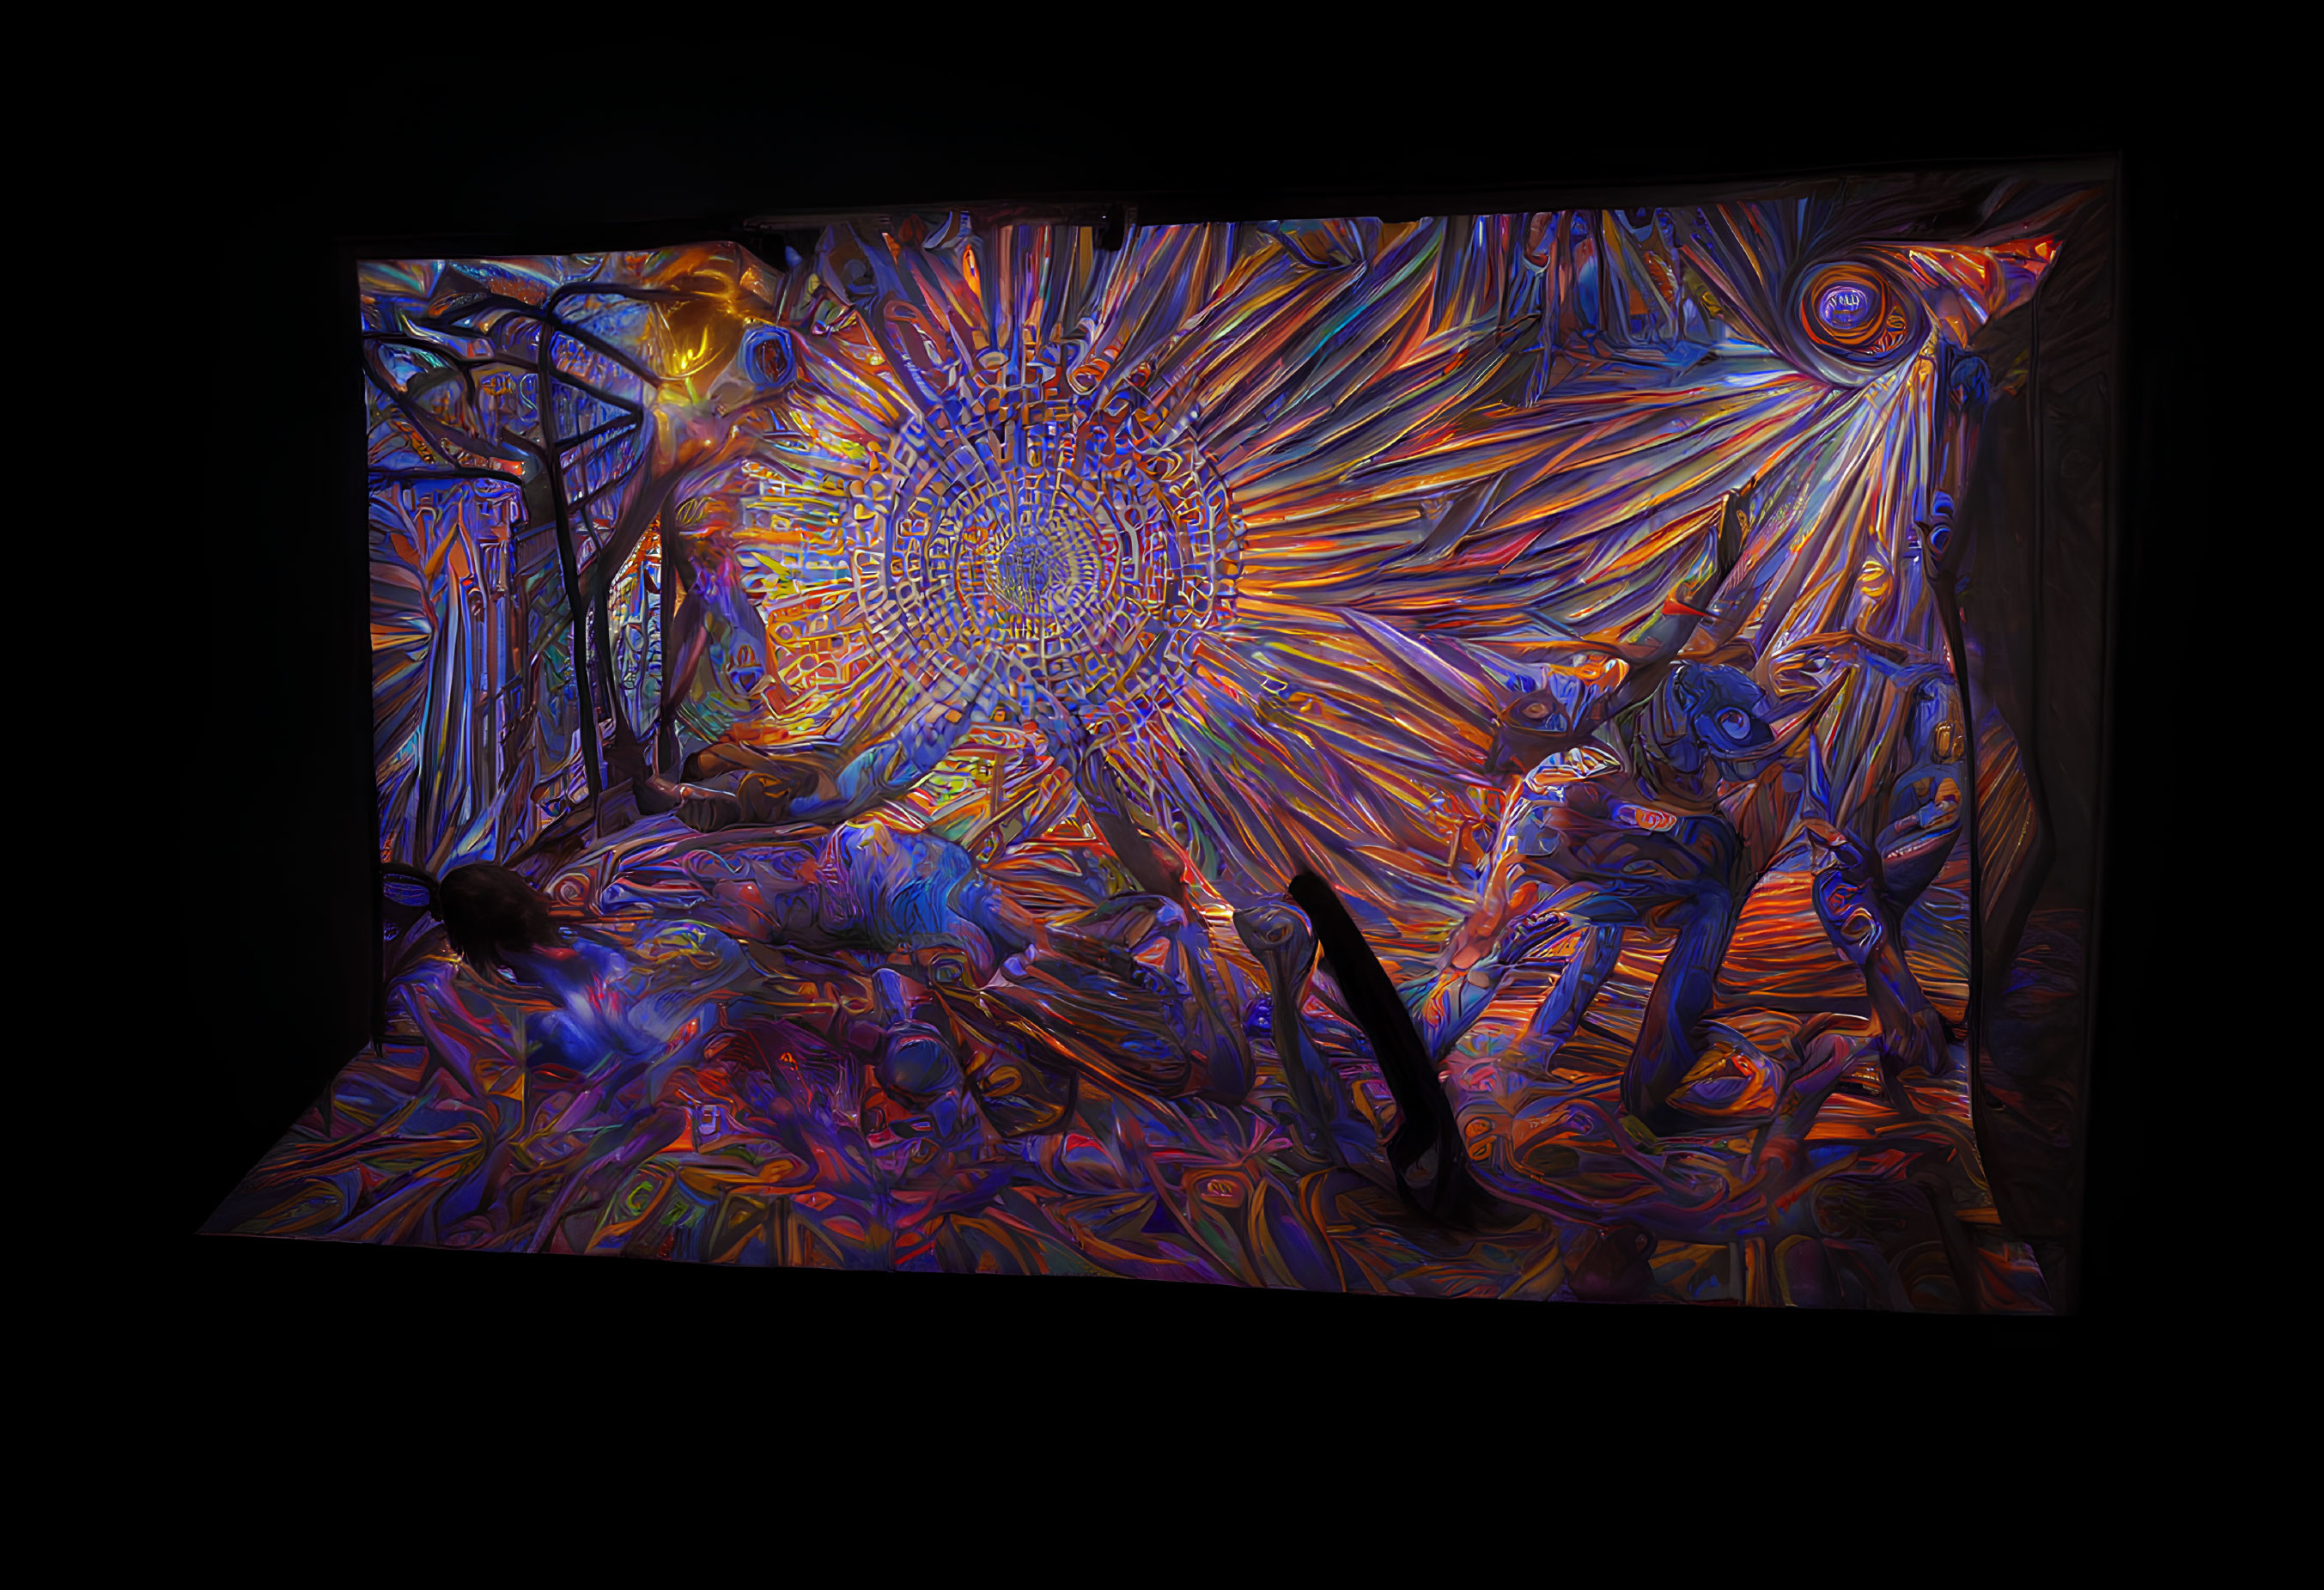 Colorful Psychedelic Room with Abstract Art Installation and Blending Figures